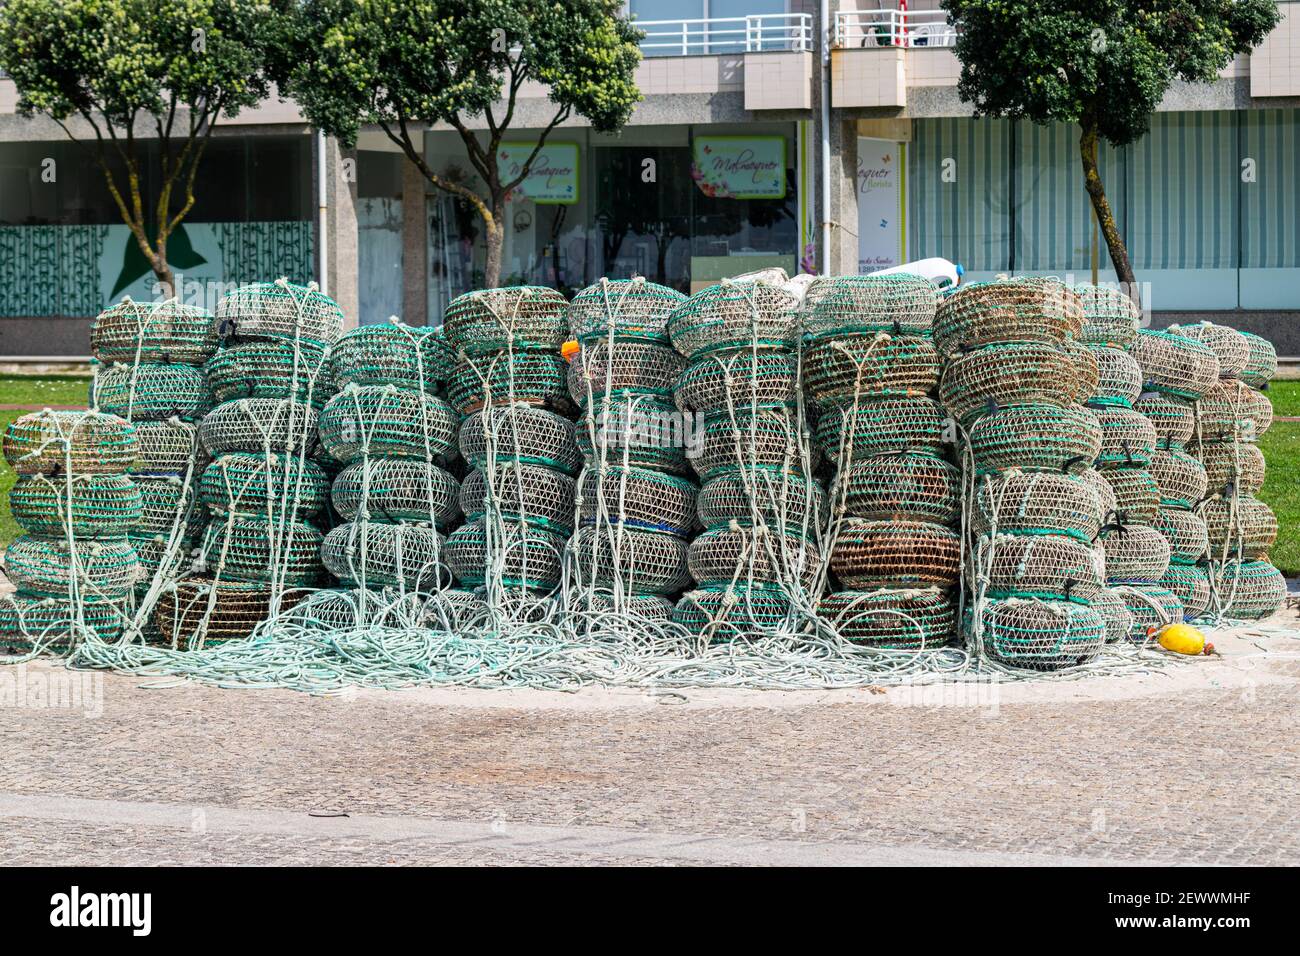 Octopus and crab traps used by locals fishermans in Apúlia, Portugal waiting to the next fish trip. Fishermans on land waiting to go fishing. Stock Photo